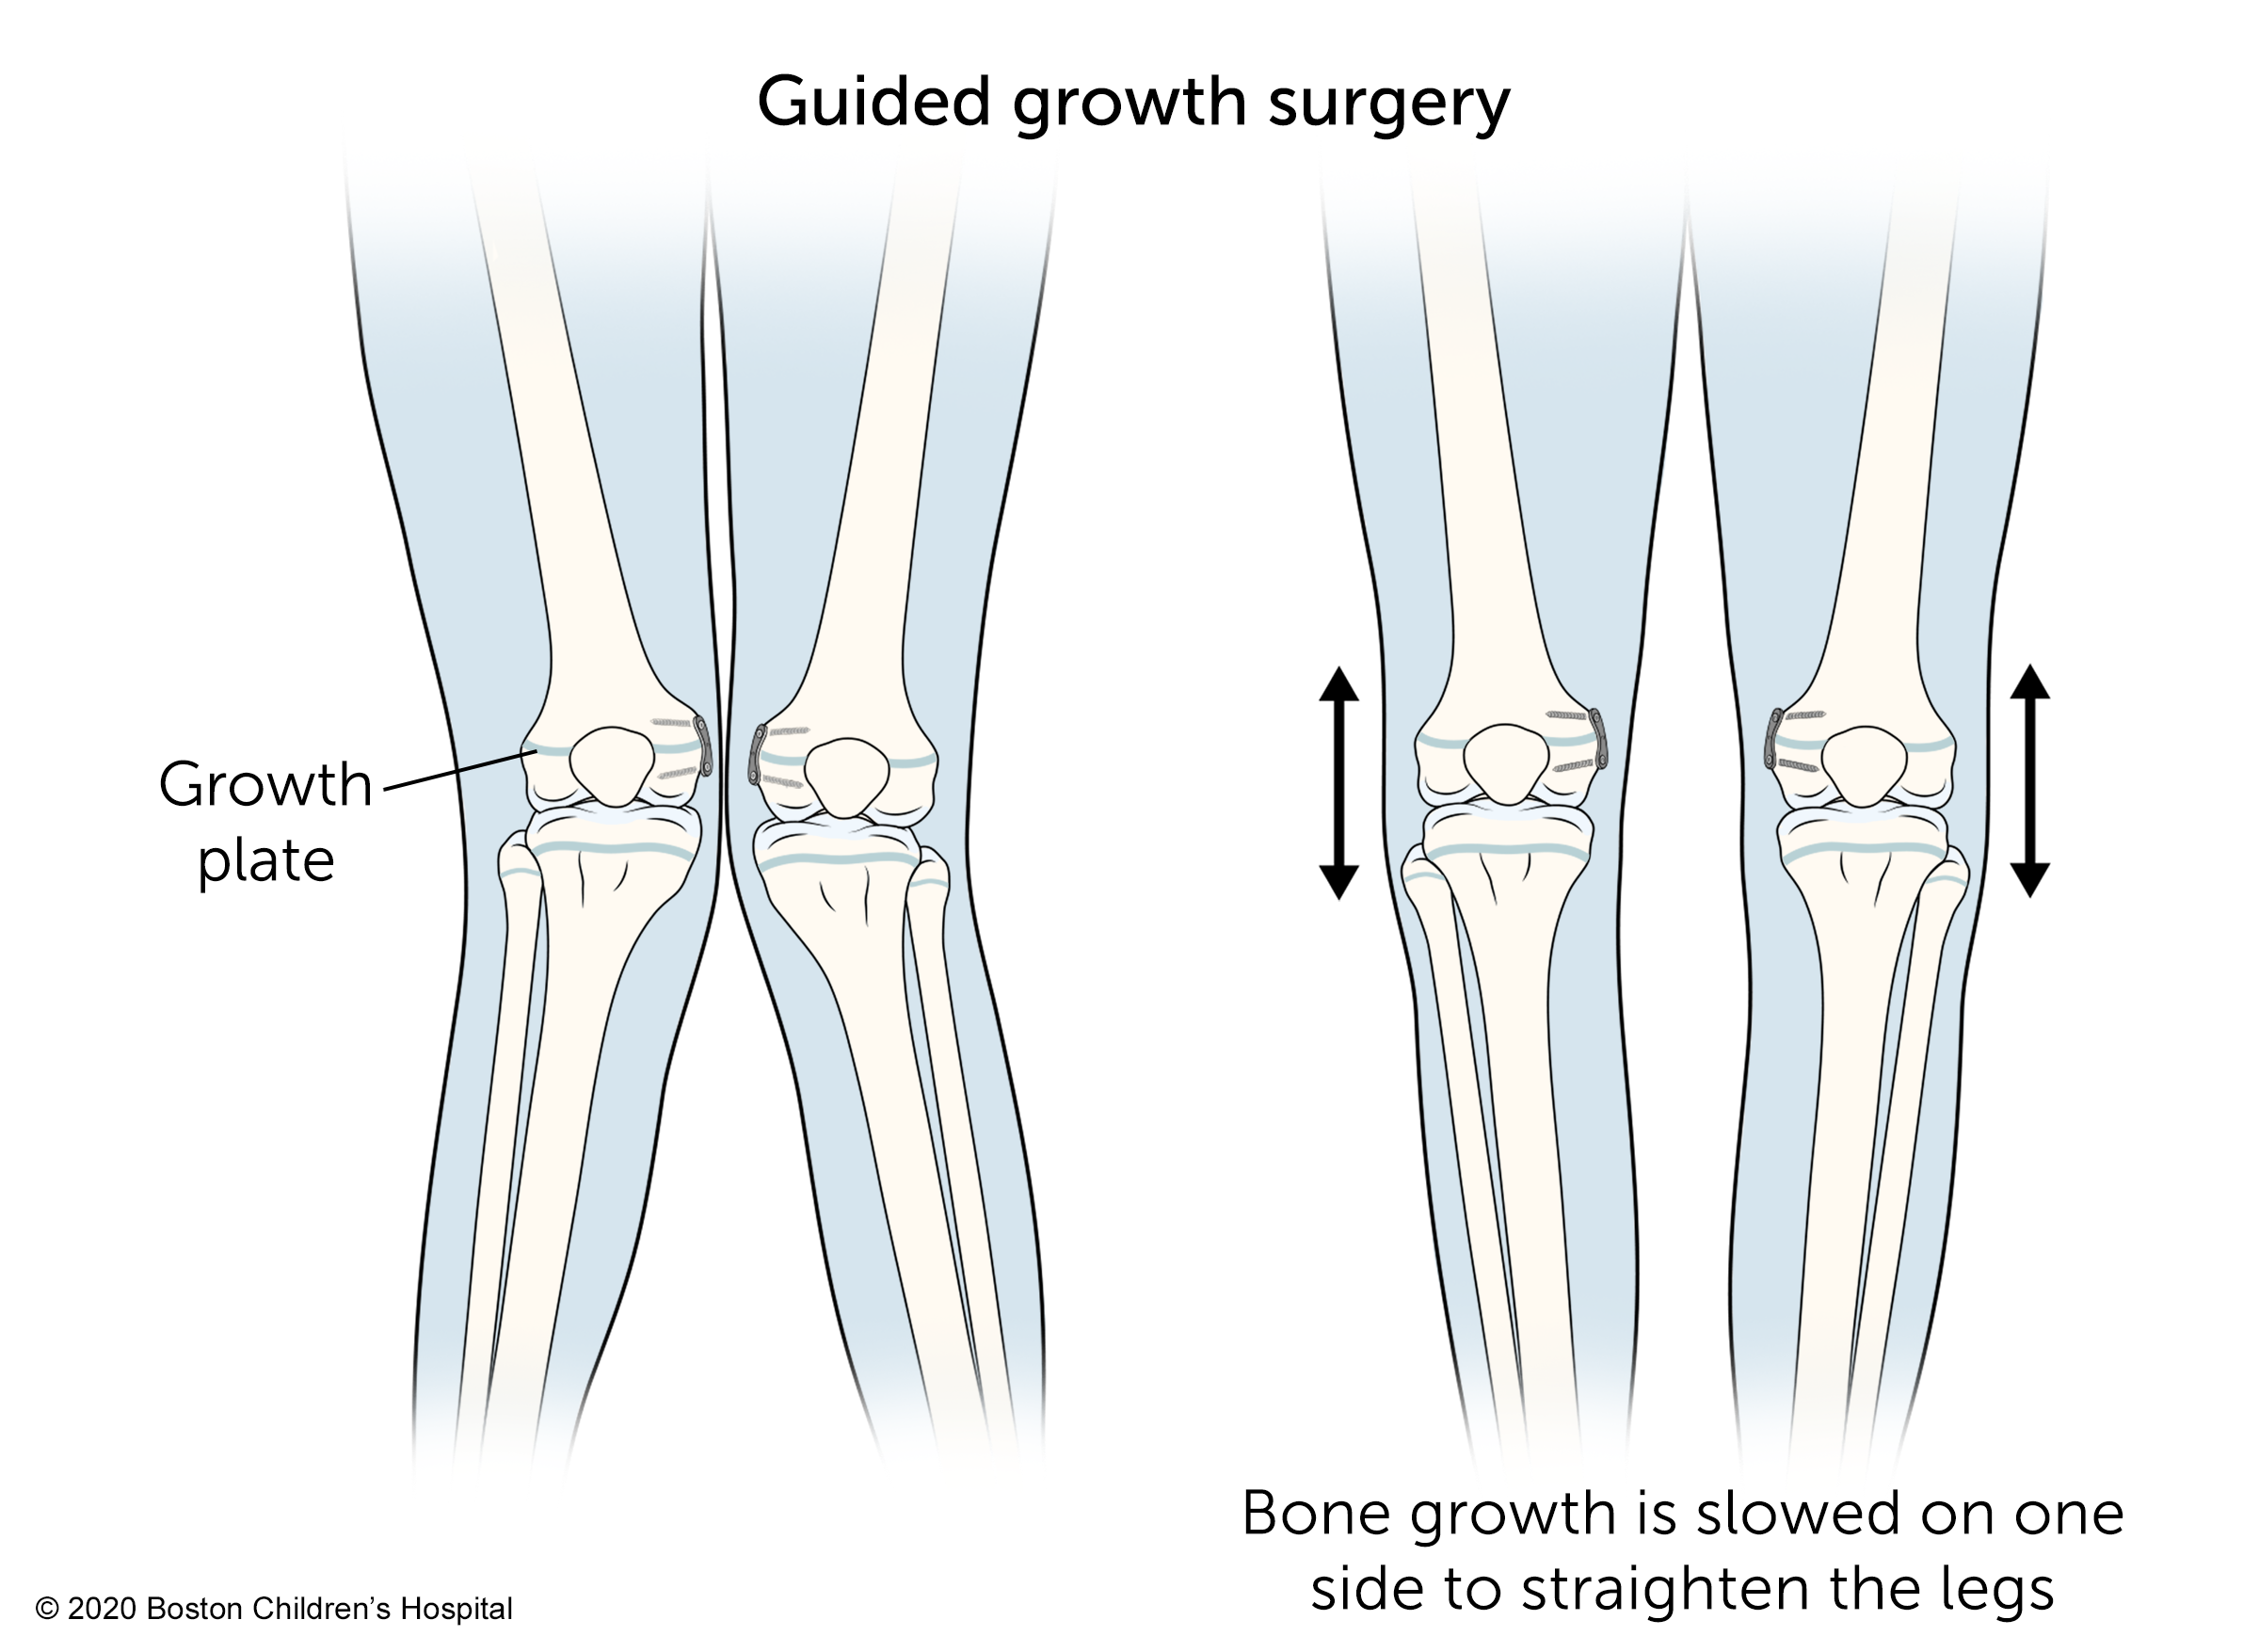 In guided growth surgery, bone growth is slowed on one side to straighten the legs.